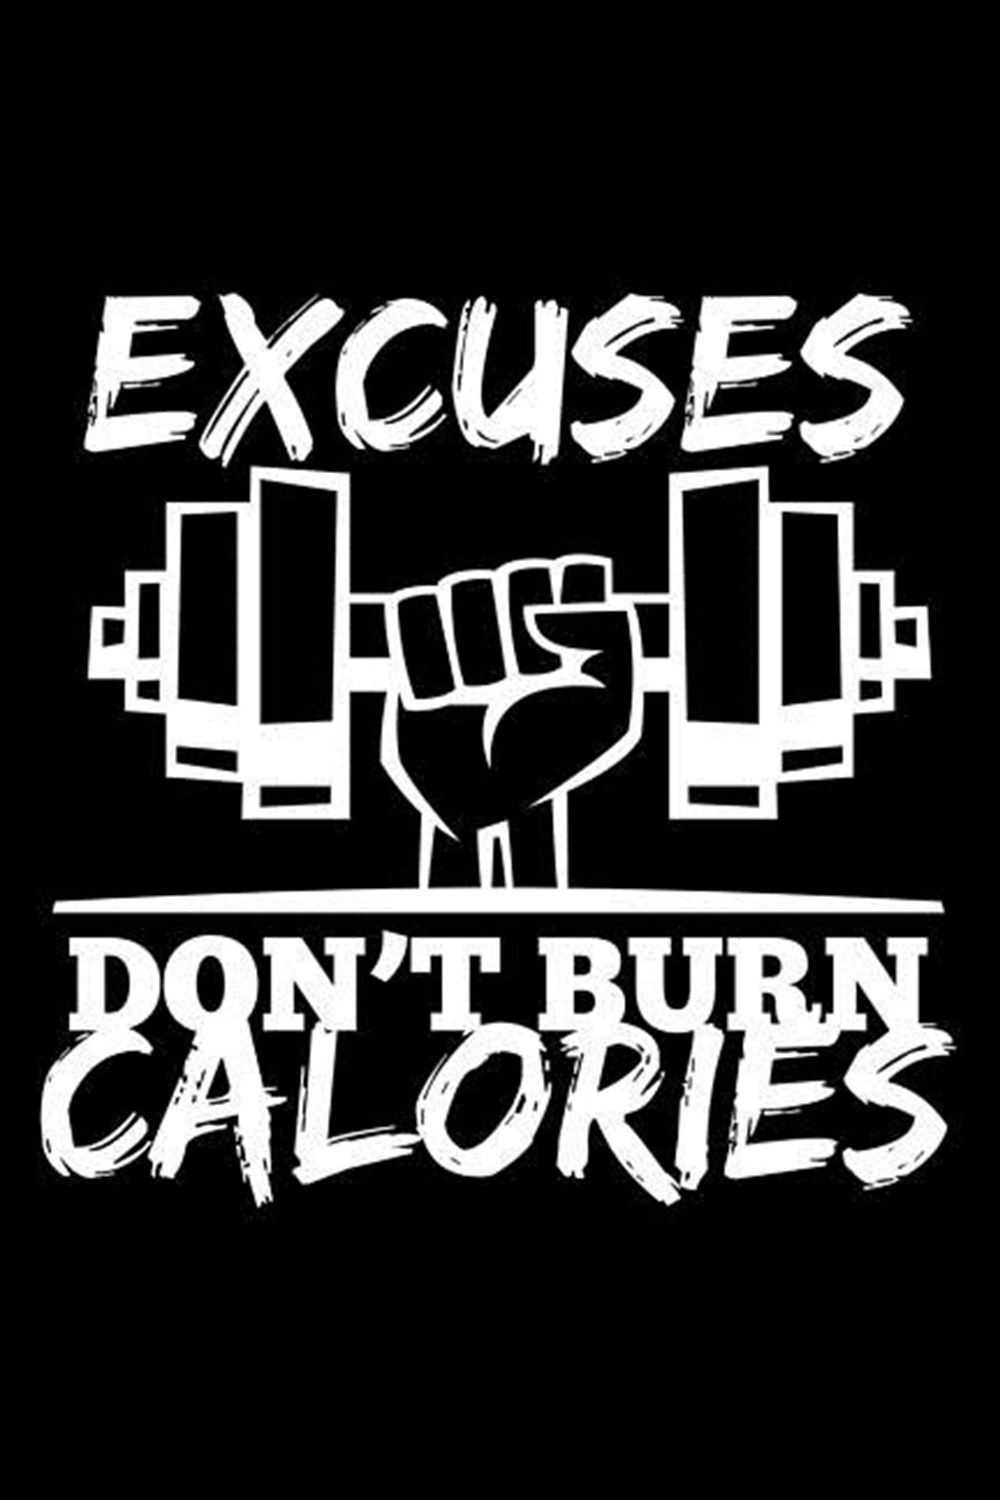 Excuses Don't Burn Calories Blank Paper Sketch Book - Artist Sketch Pad Journal for Sketching, Doodl